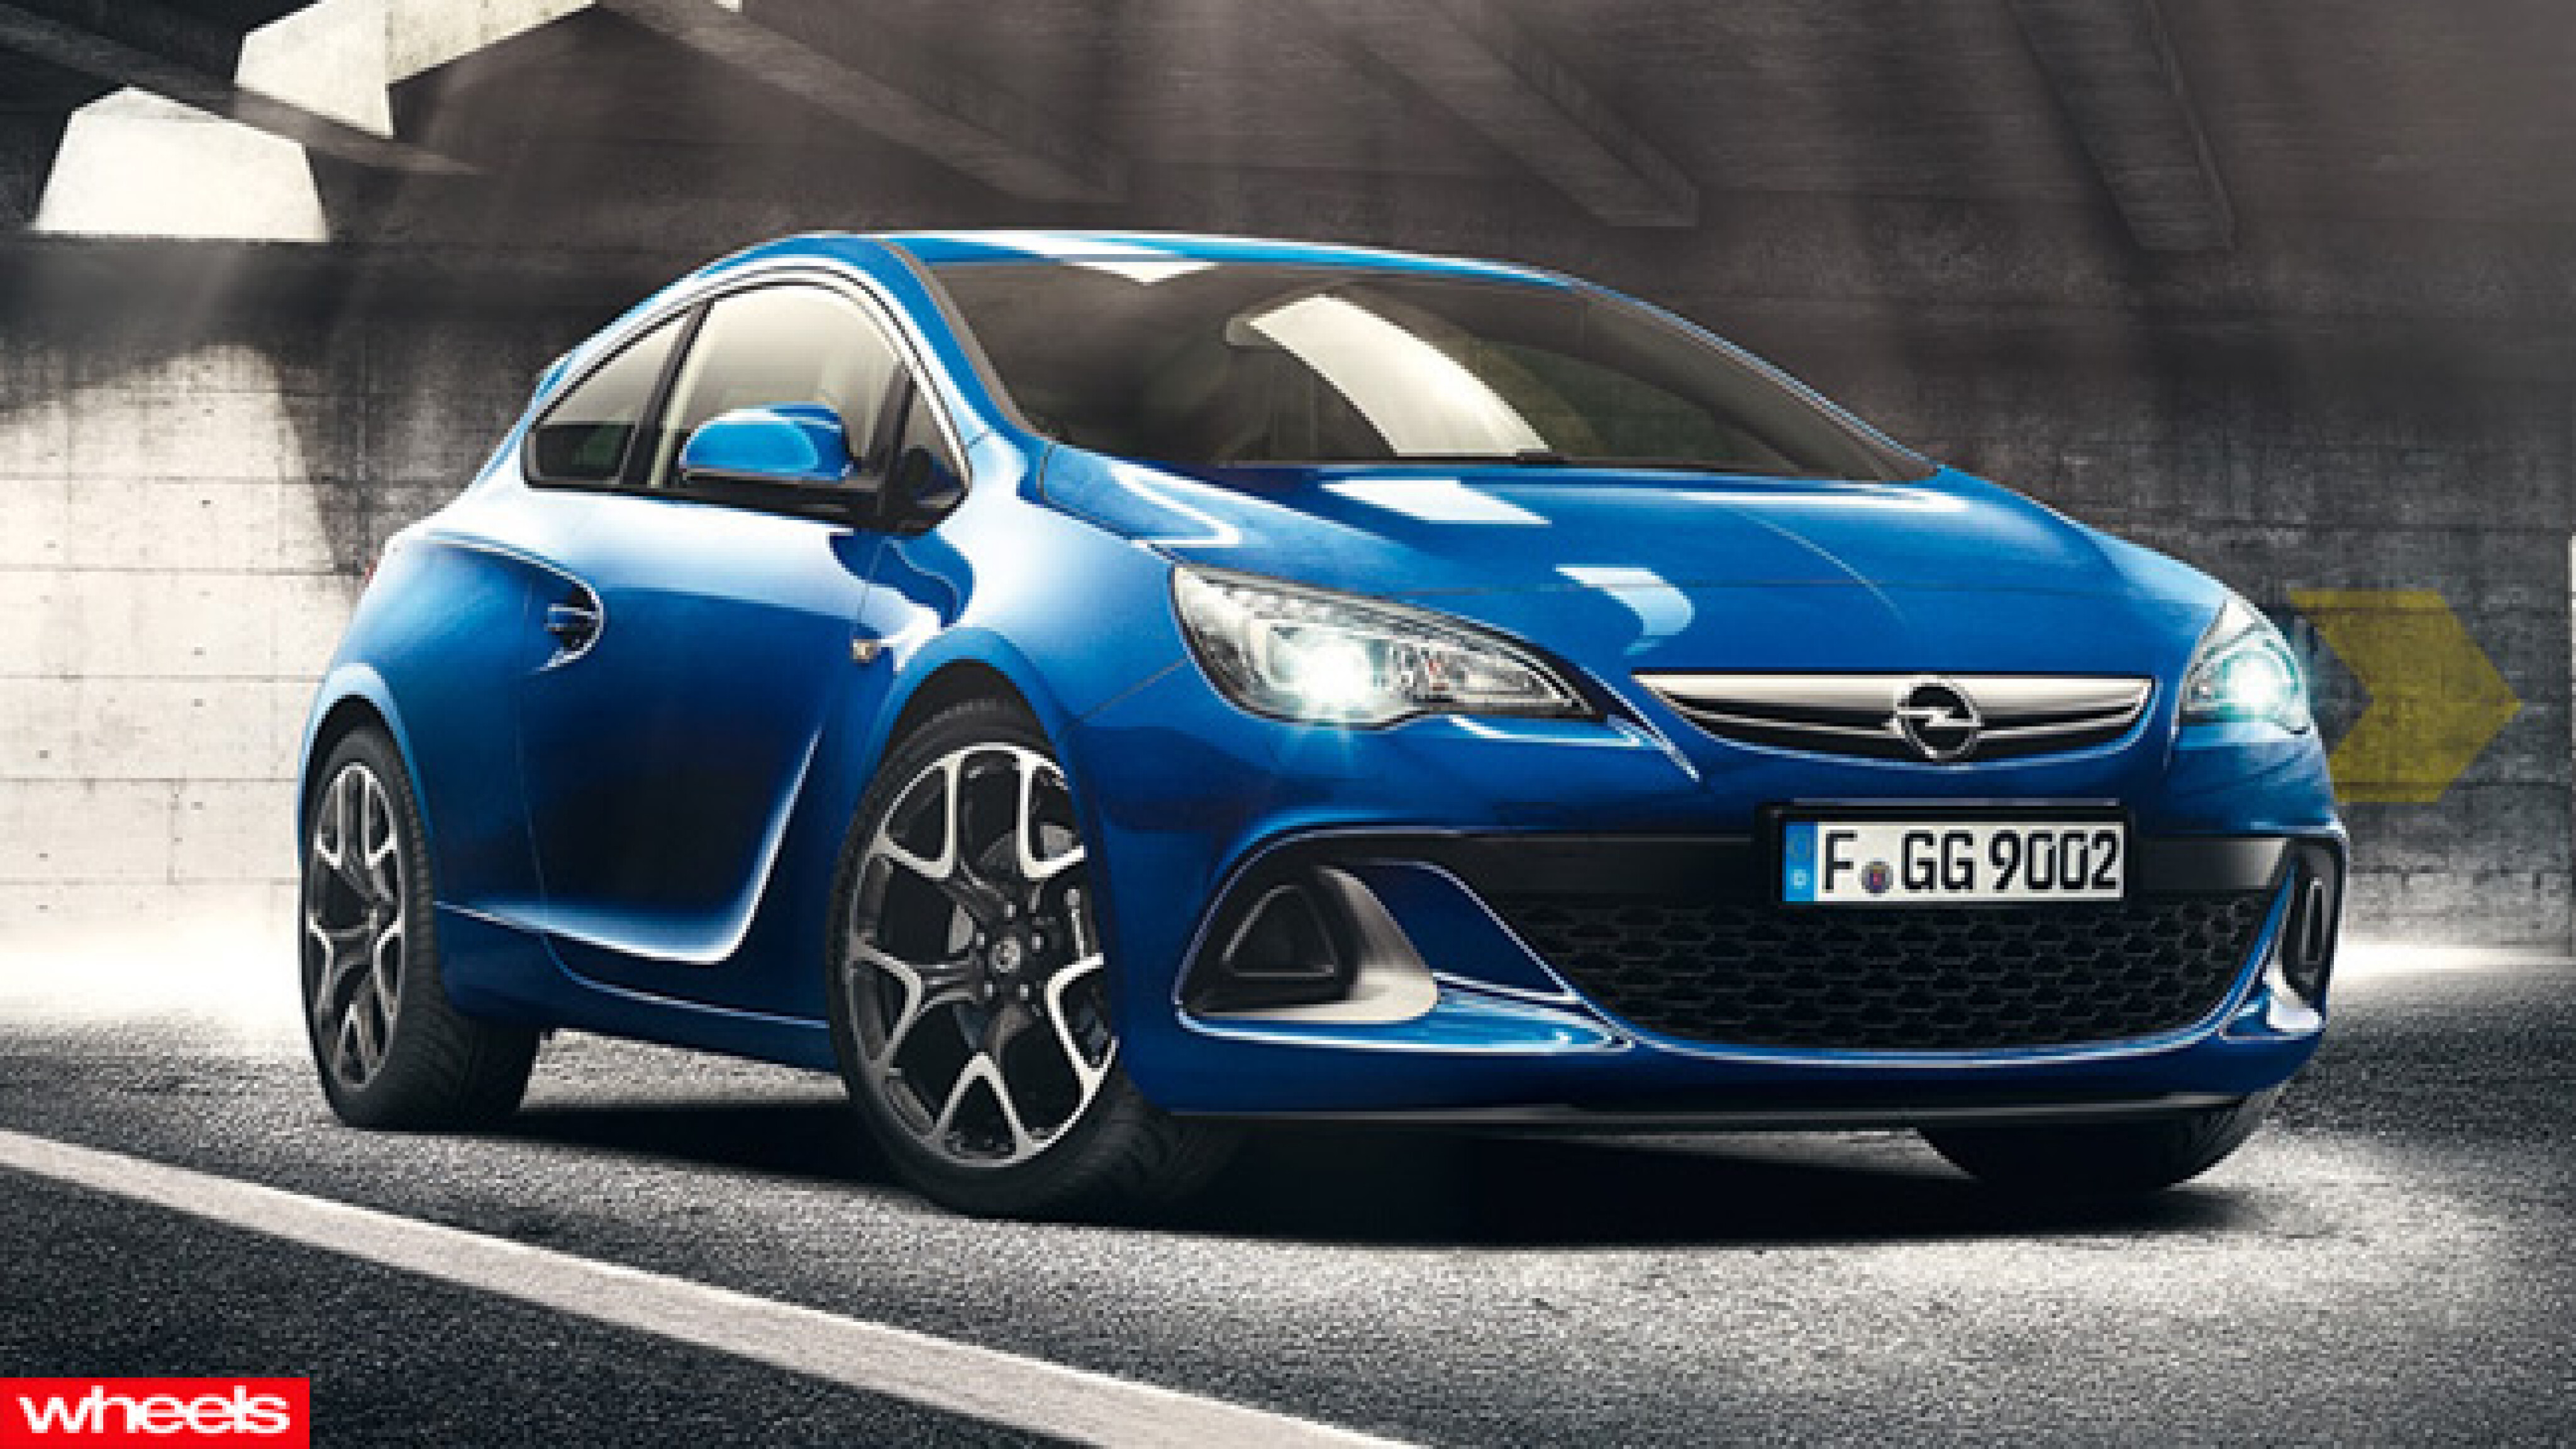 https://assets.whichcar.com.au/image/upload/s--Vsfc8xys--/c_fill,f_auto,q_auto:good/t_p_16x9/v1/archive/Motoring/2014/01/15/10155/Opel_Astra_OPC.jpg